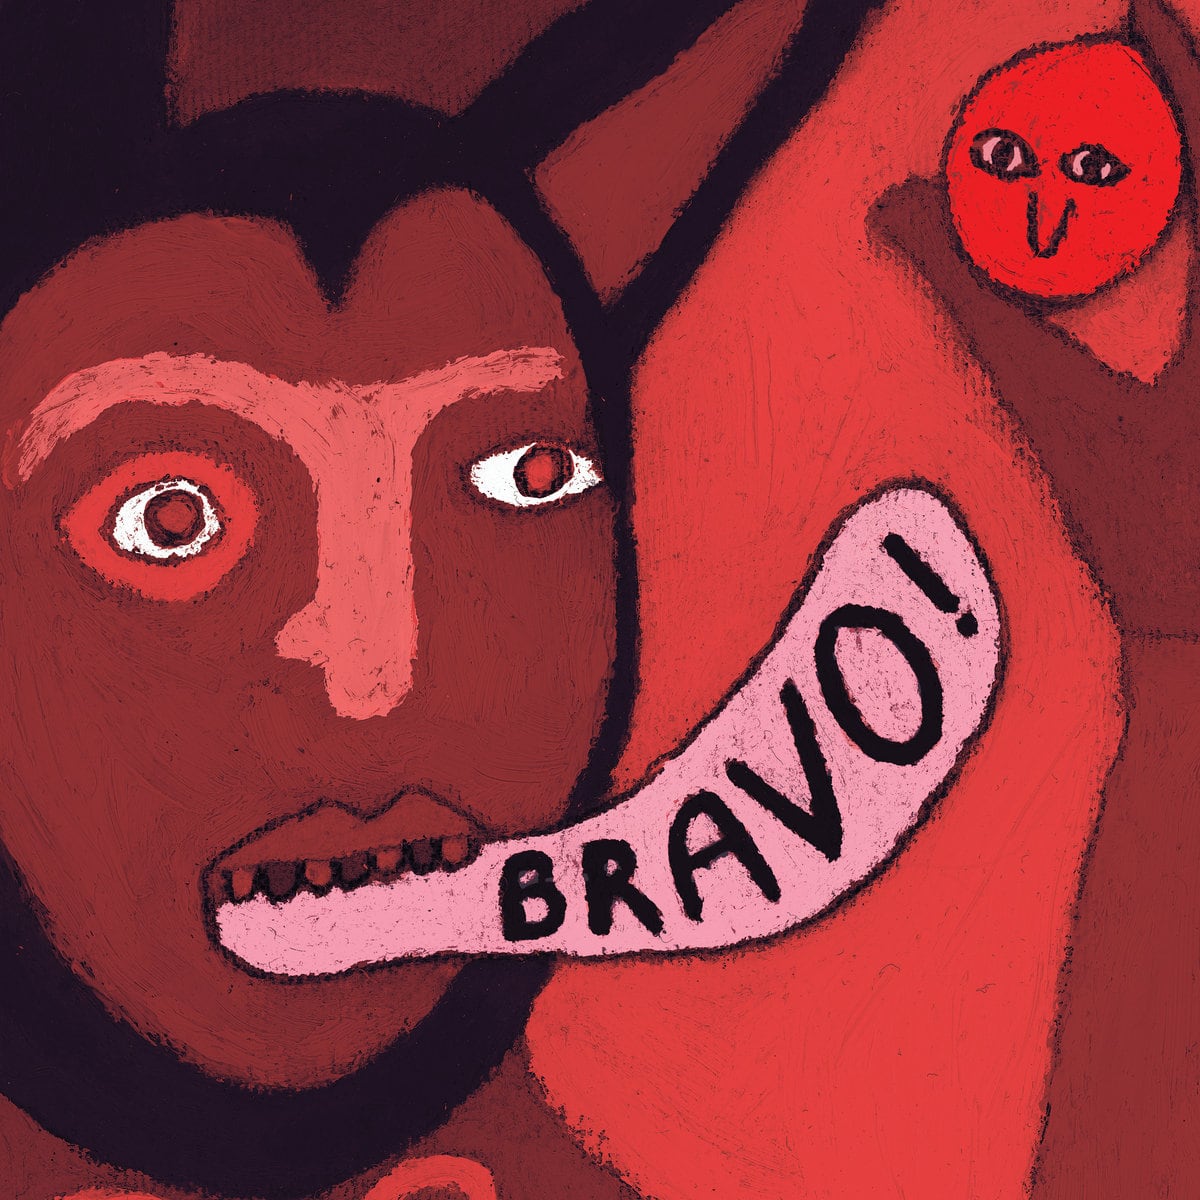 Cover of 'Bravo!', by Sorry Girls.